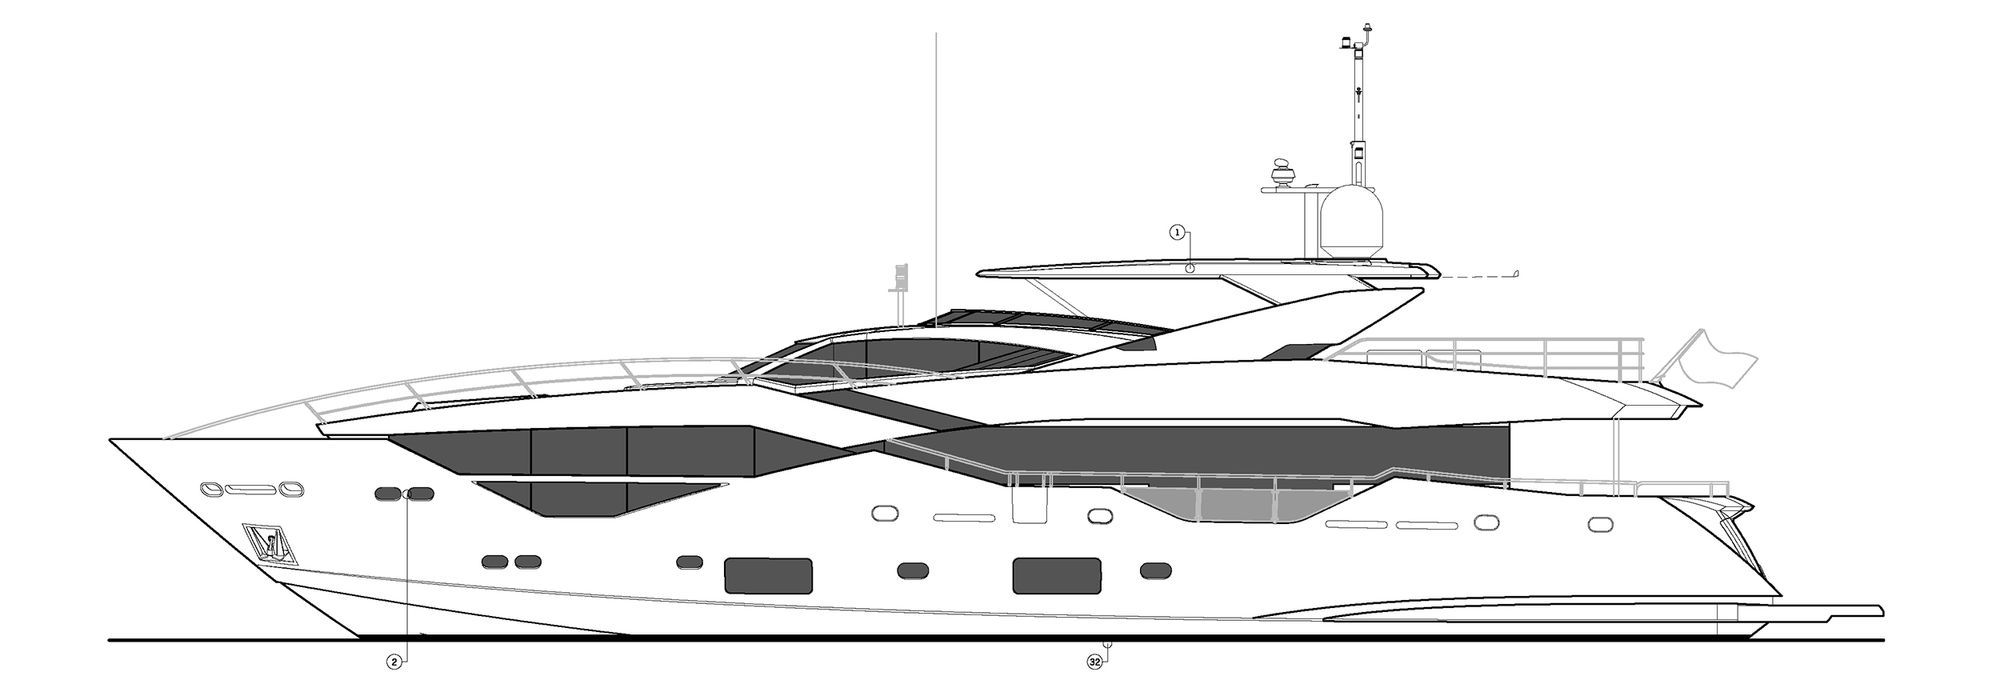 116 foot yacht for sale